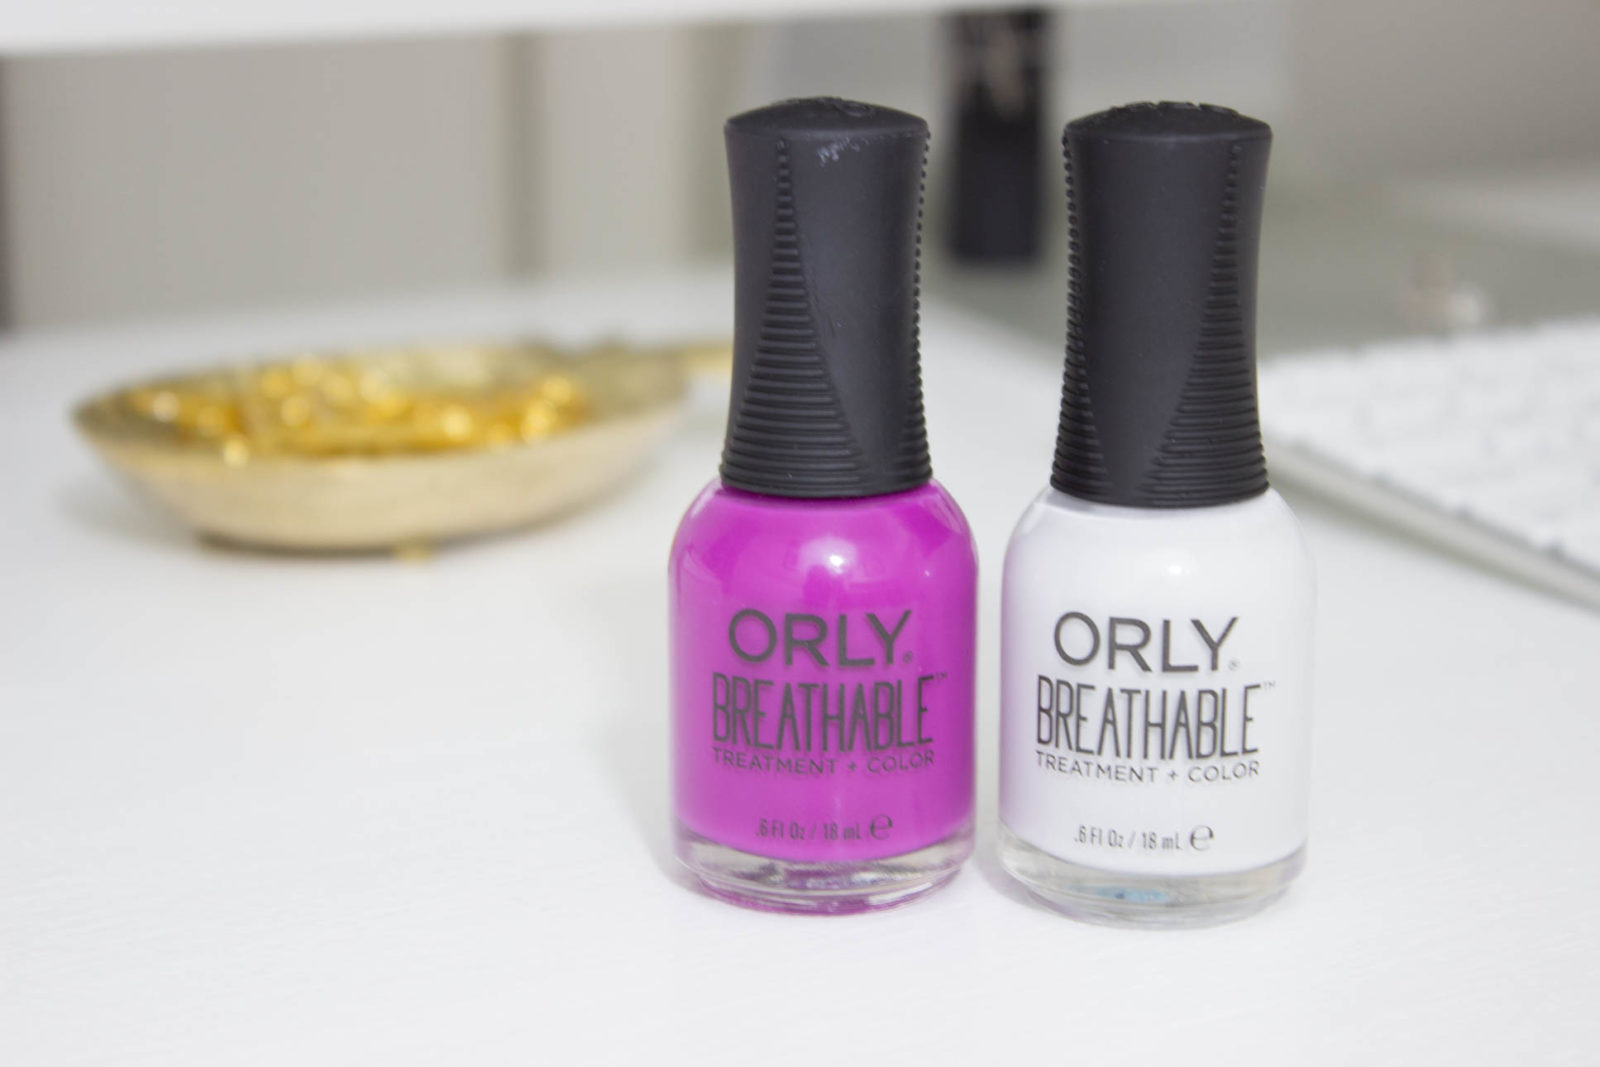 10. Orly Breathable Treatment + Color Nail Polish in "Toenail Colored" - wide 2